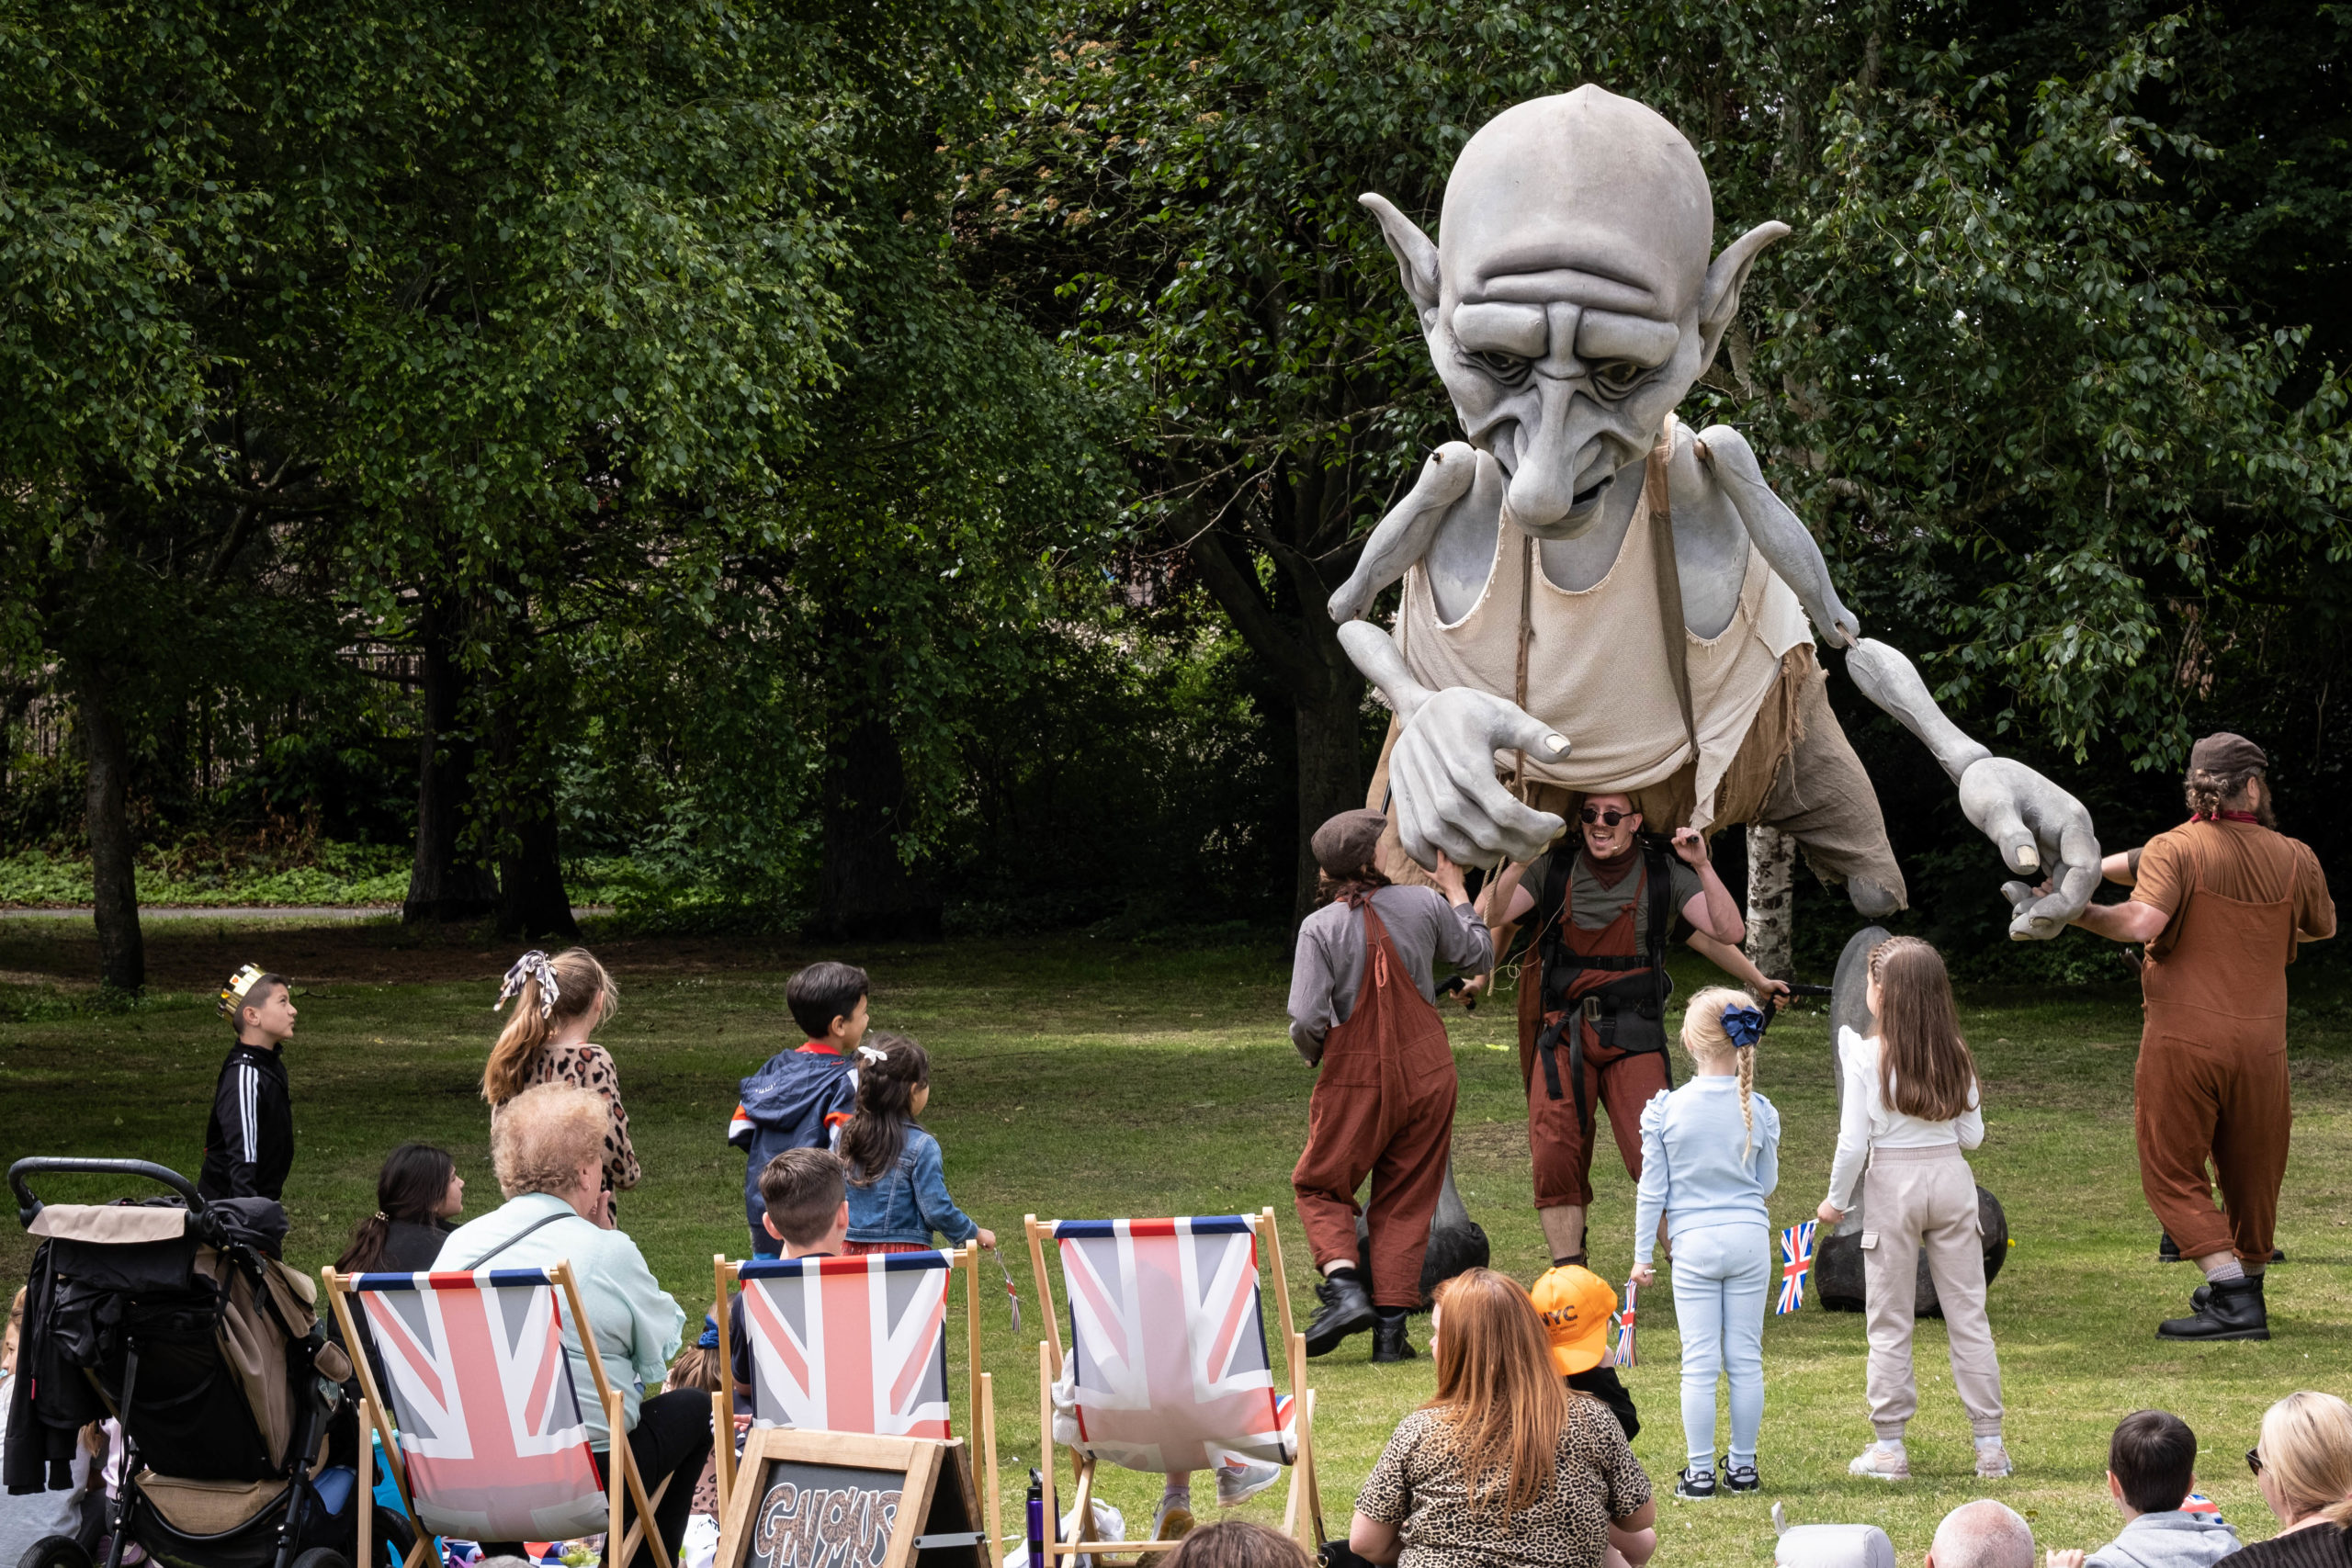 Extra large puppet being moved by three people in front of people sitting on deckchairs